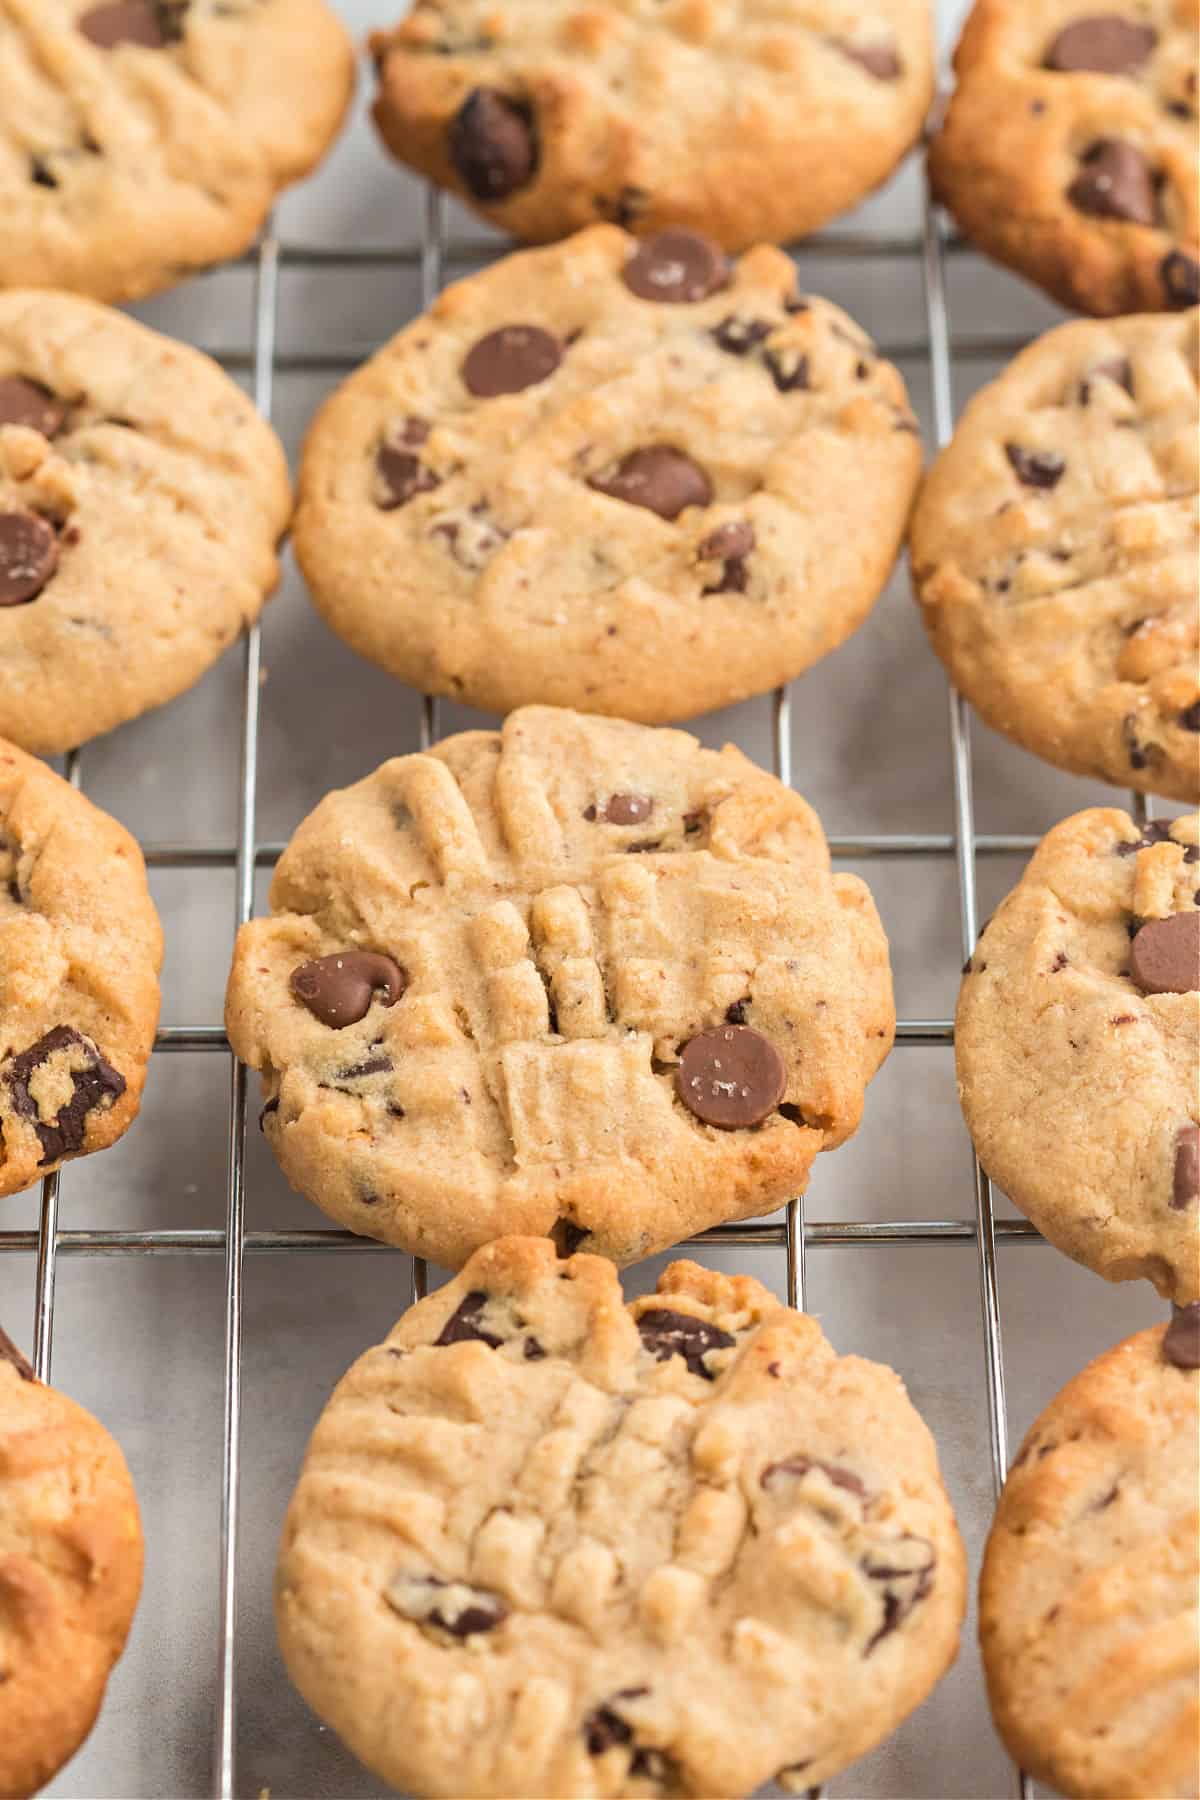 Peanut butter chocolate chips with criss crossed pattern on top, on a cooling rack.